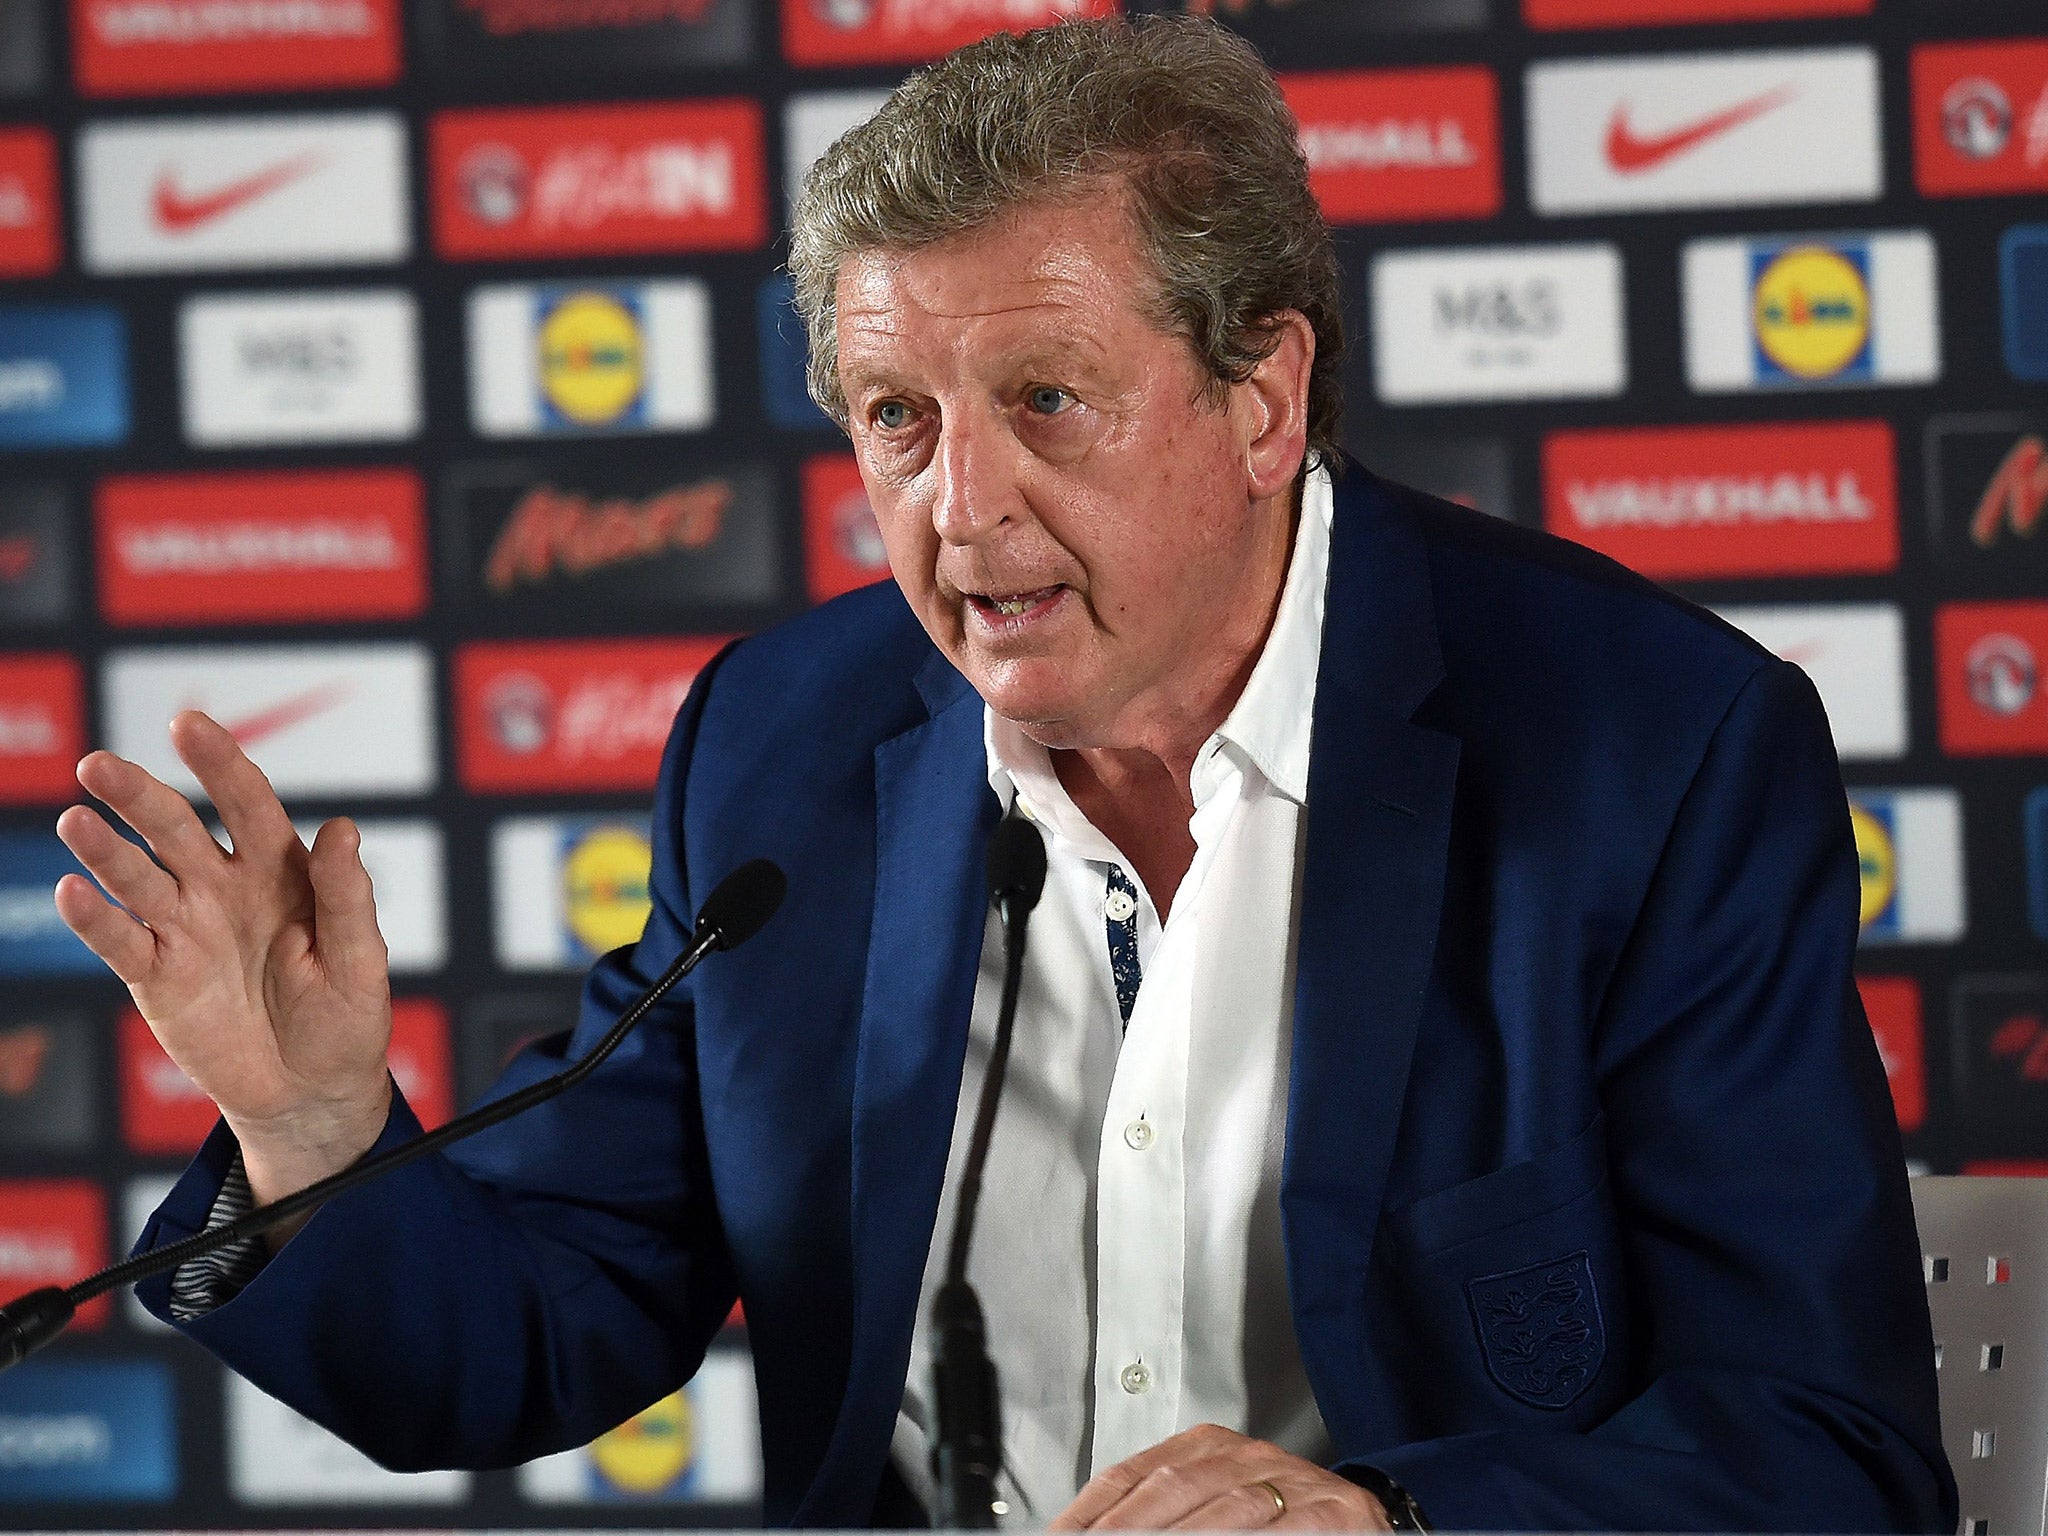 &#13;
Roy Hodgson faced the media for the final time on Tuesday &#13;